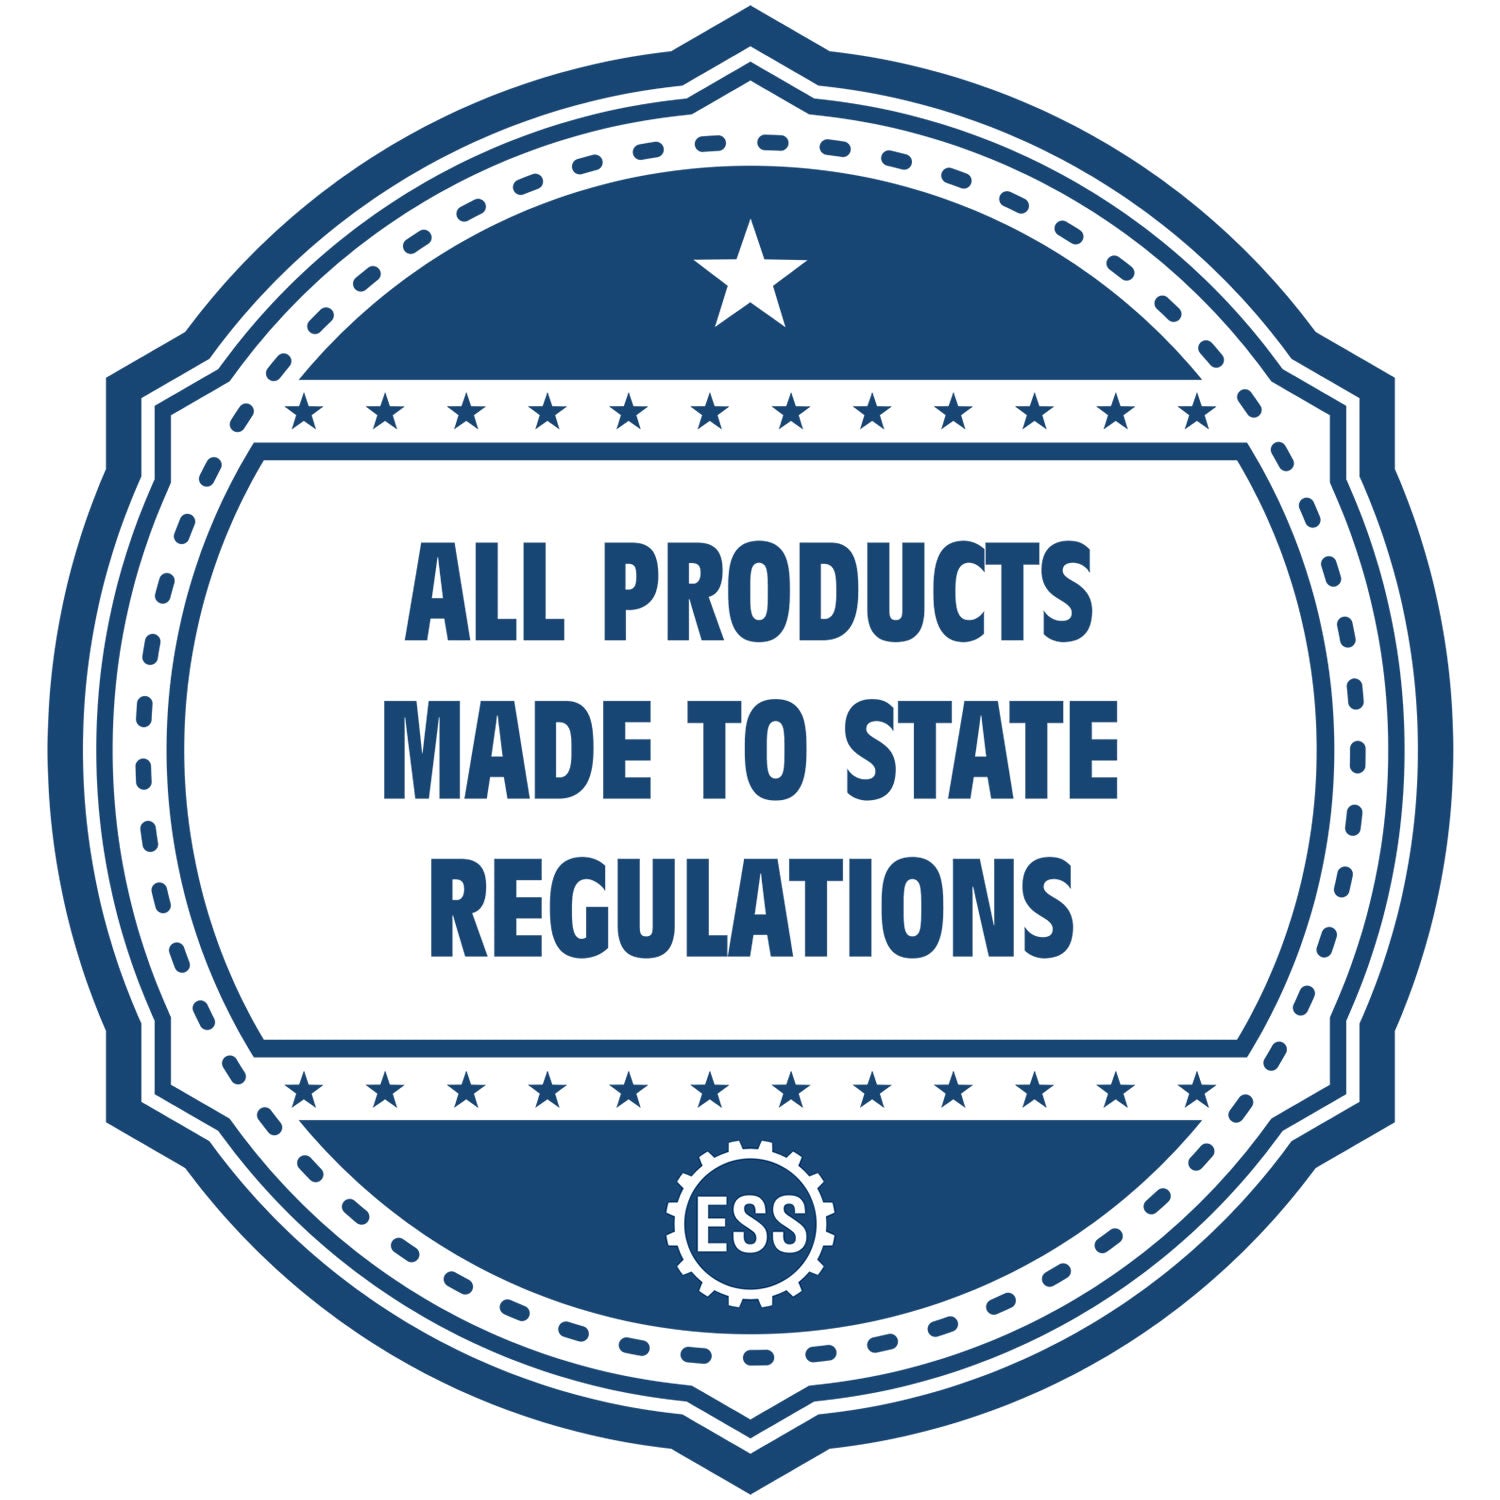 An icon or badge element for the State of Puerto Rico Extended Long Reach Engineer Seal showing that this product is made in compliance with state regulations.